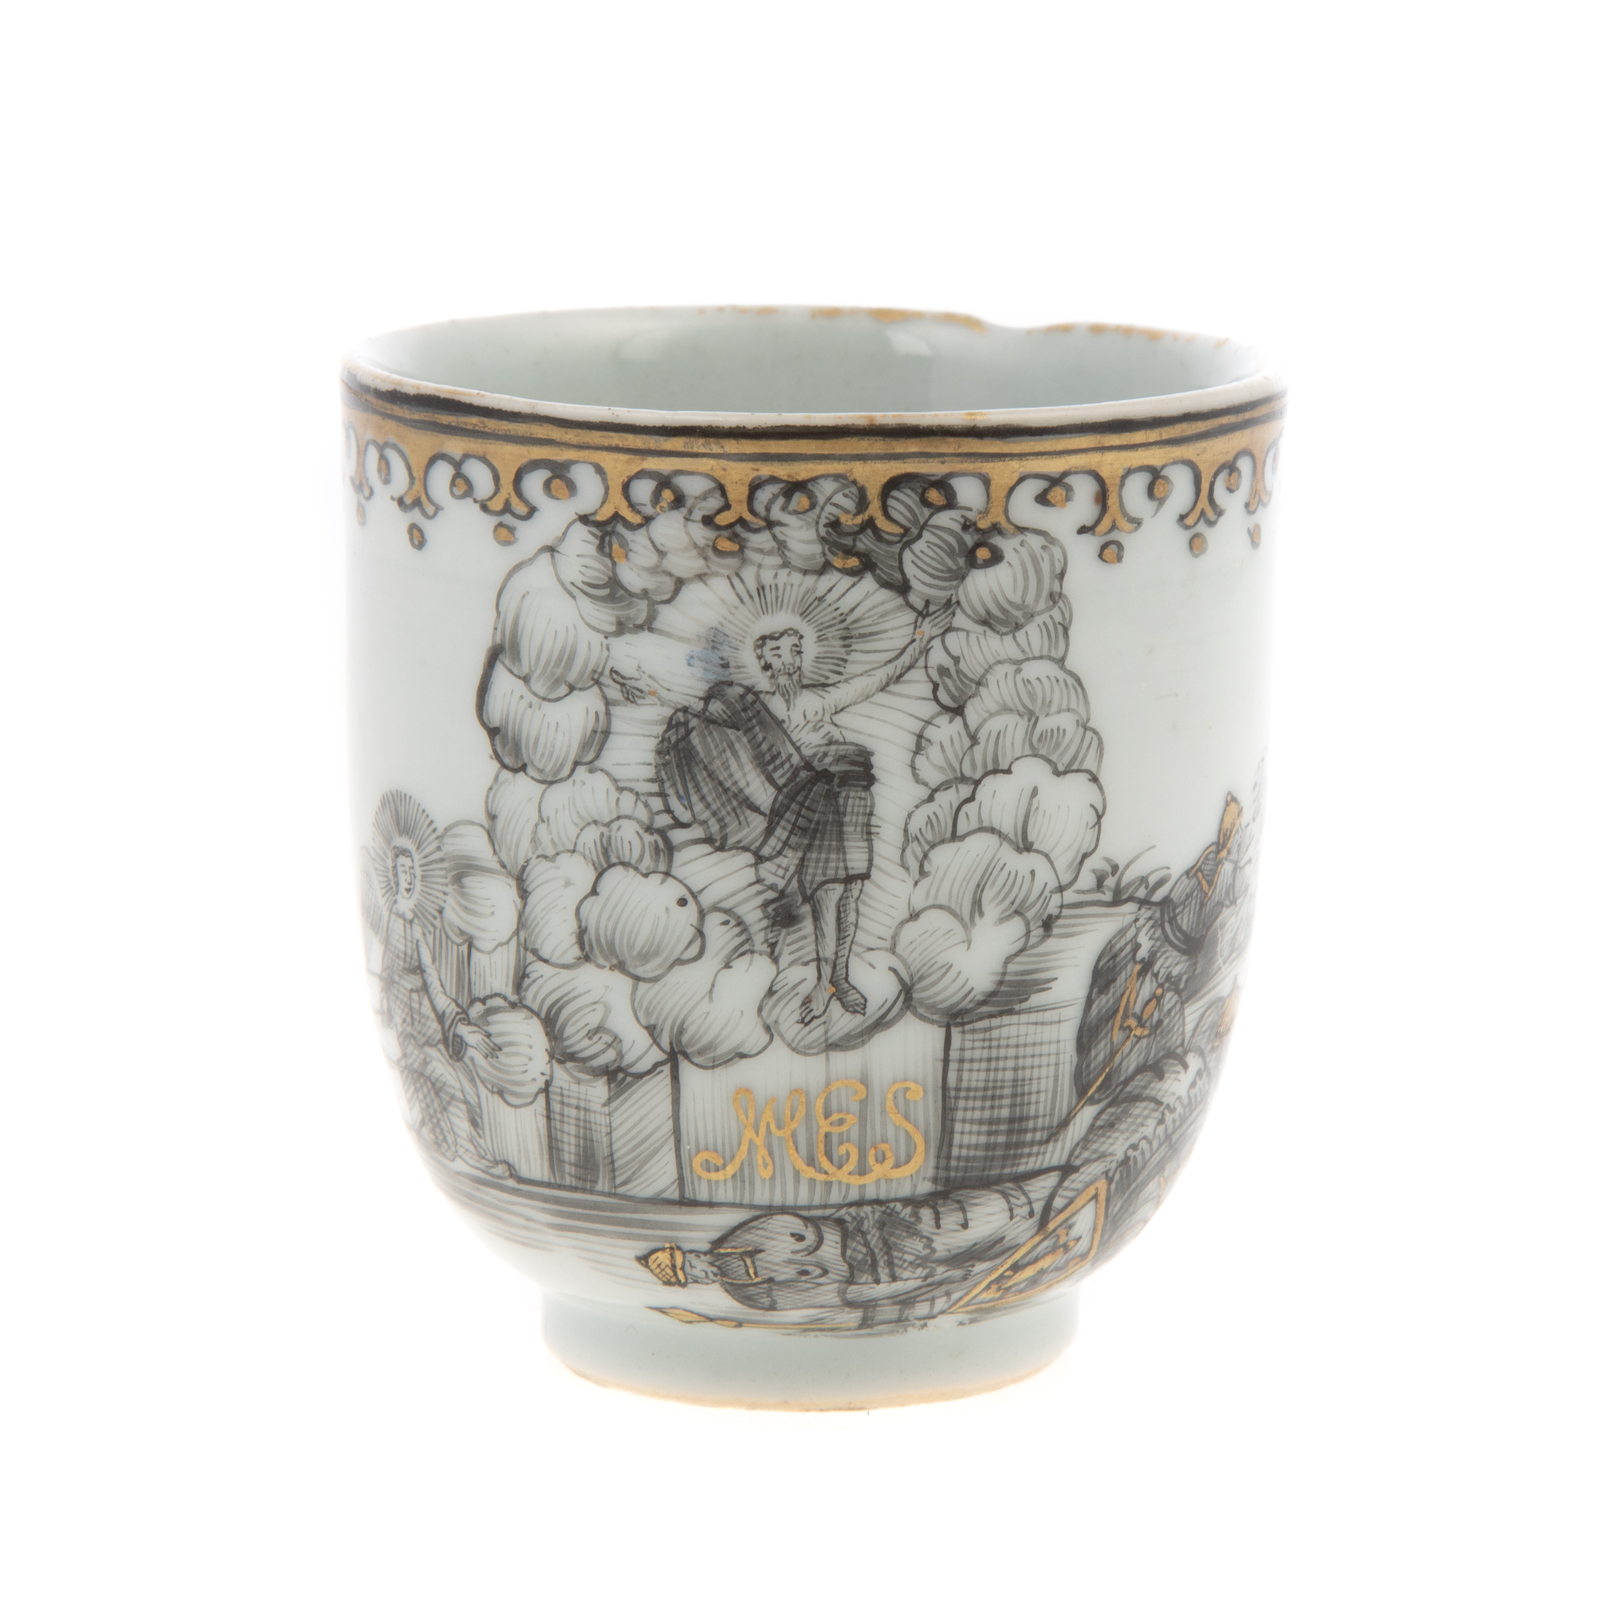 CHINESE EXPORT JESUIT WARE TEACUP